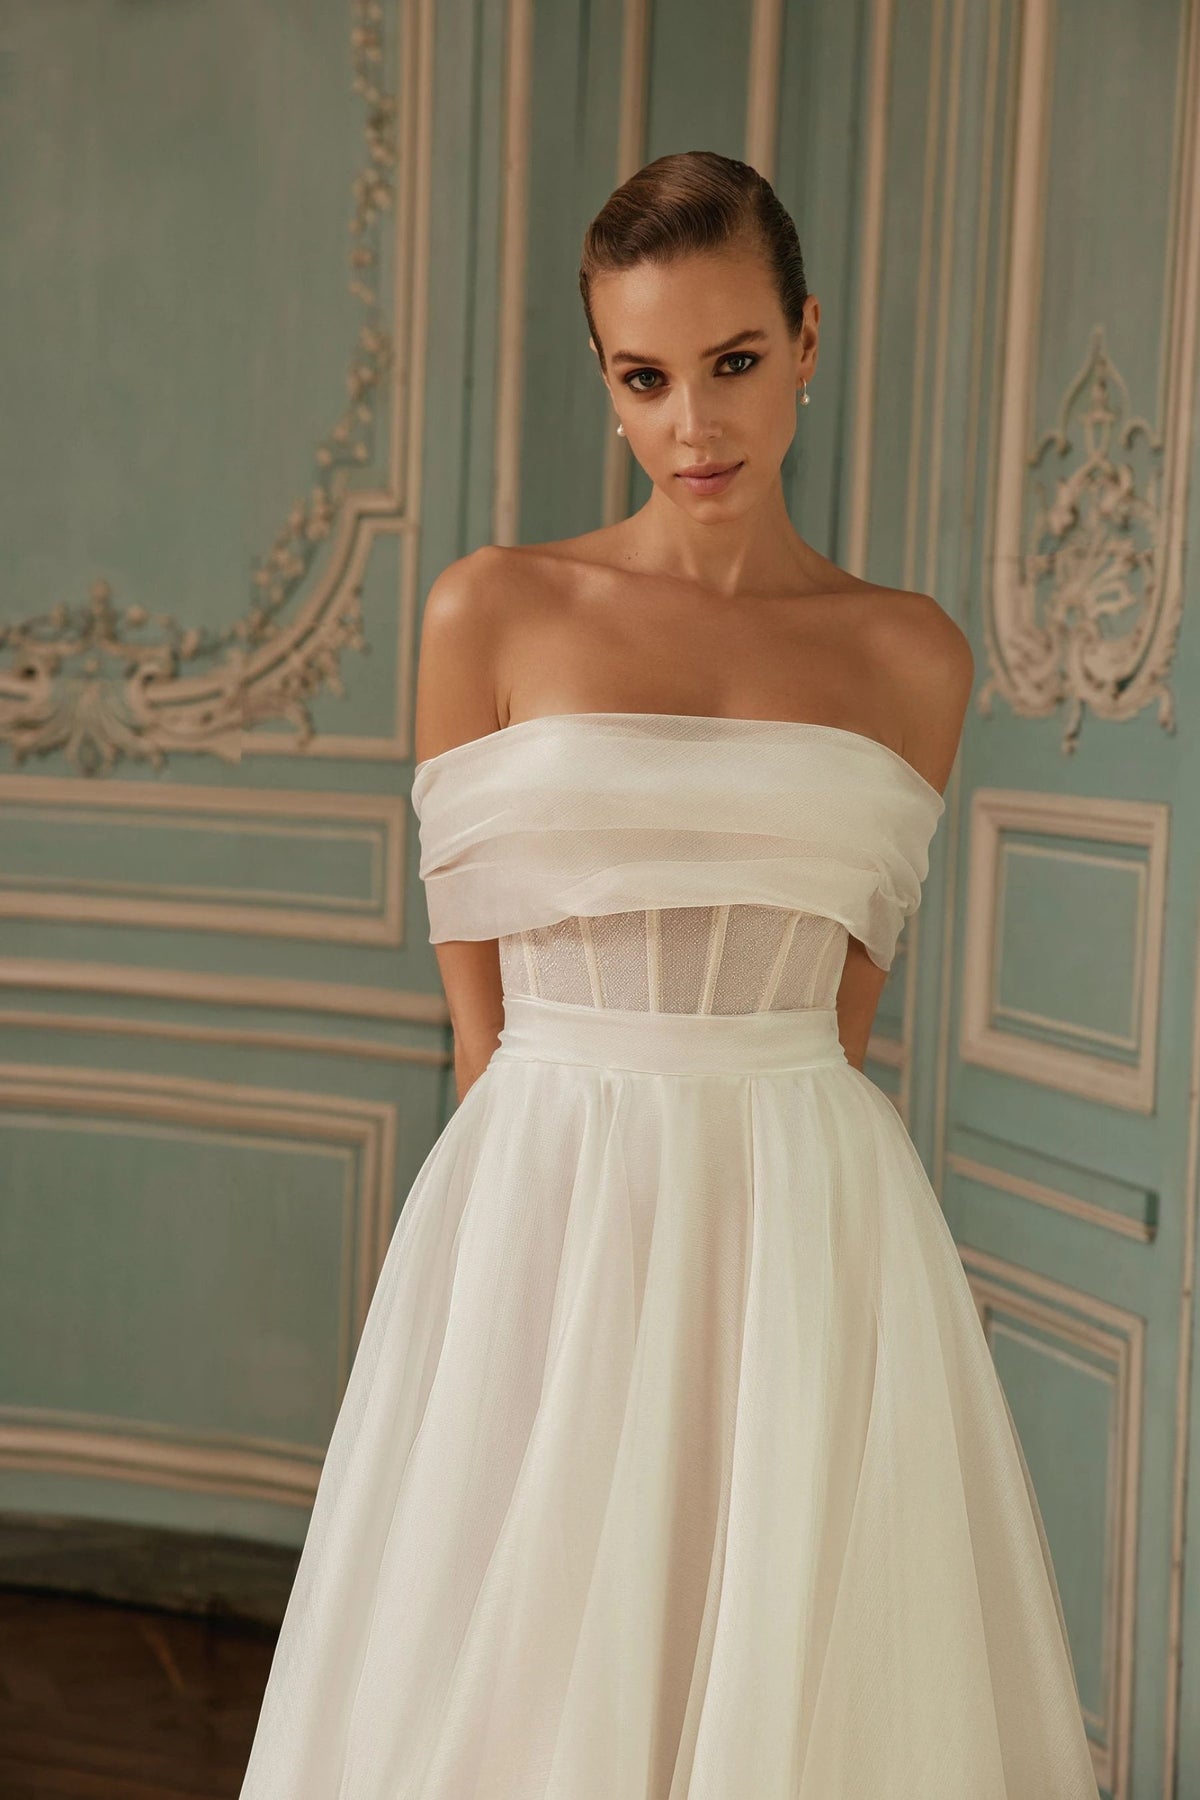 Comfortable Sleeveless Straight Neckline Aline Wedding Dress Bridal Gown Open Back Off the Shoulder Detachable Puff Sleeves Train Organza